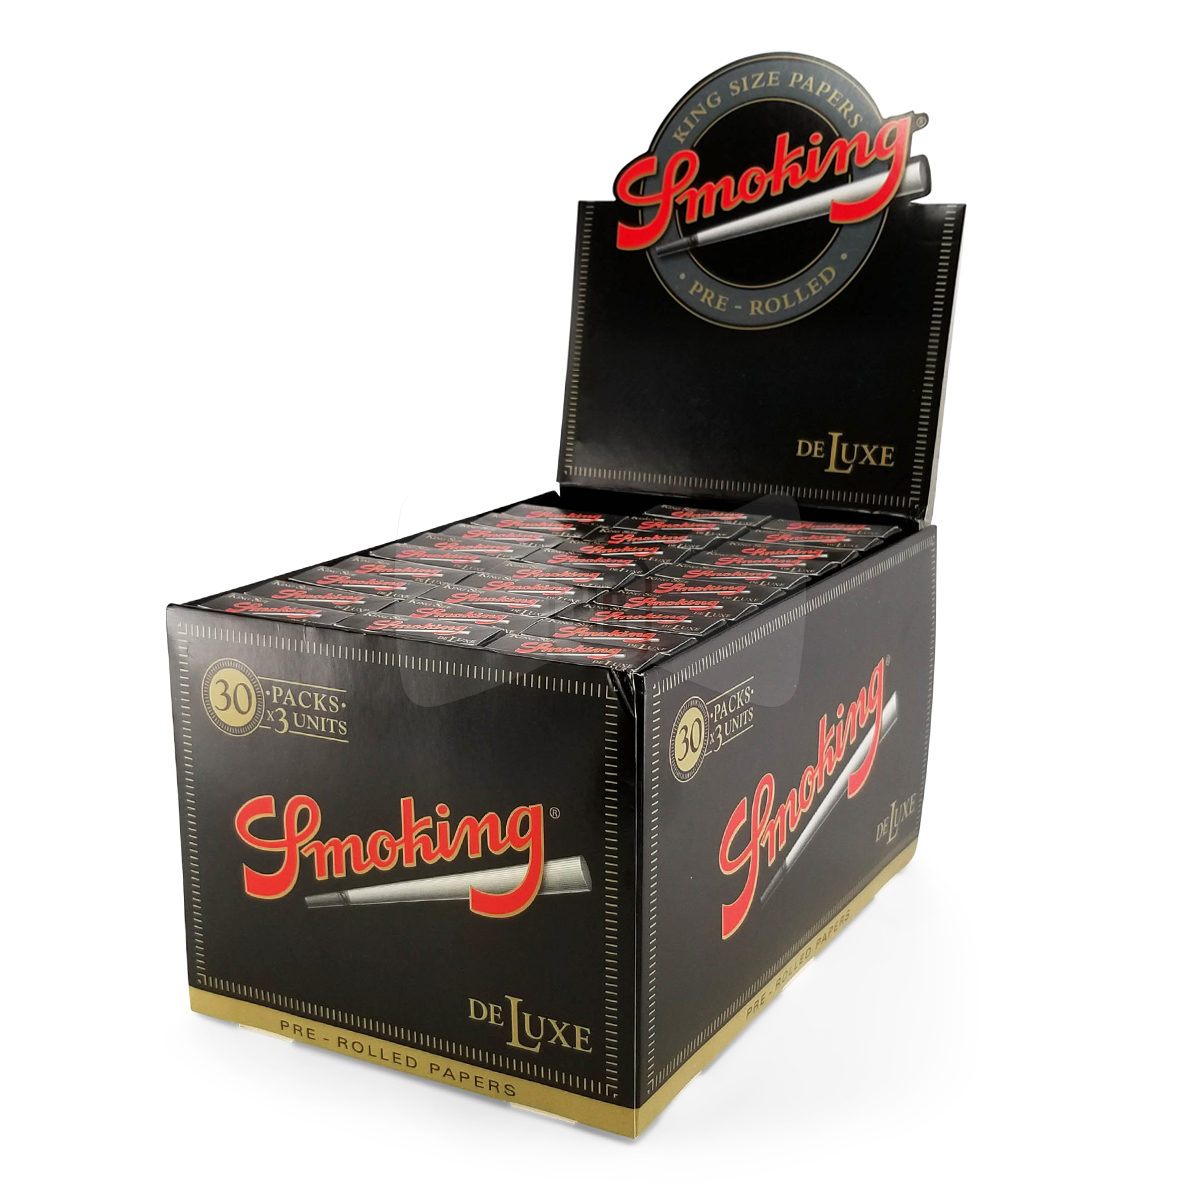 Smoking Brand Deluxe King Size Cones Full Box (30 Packs)